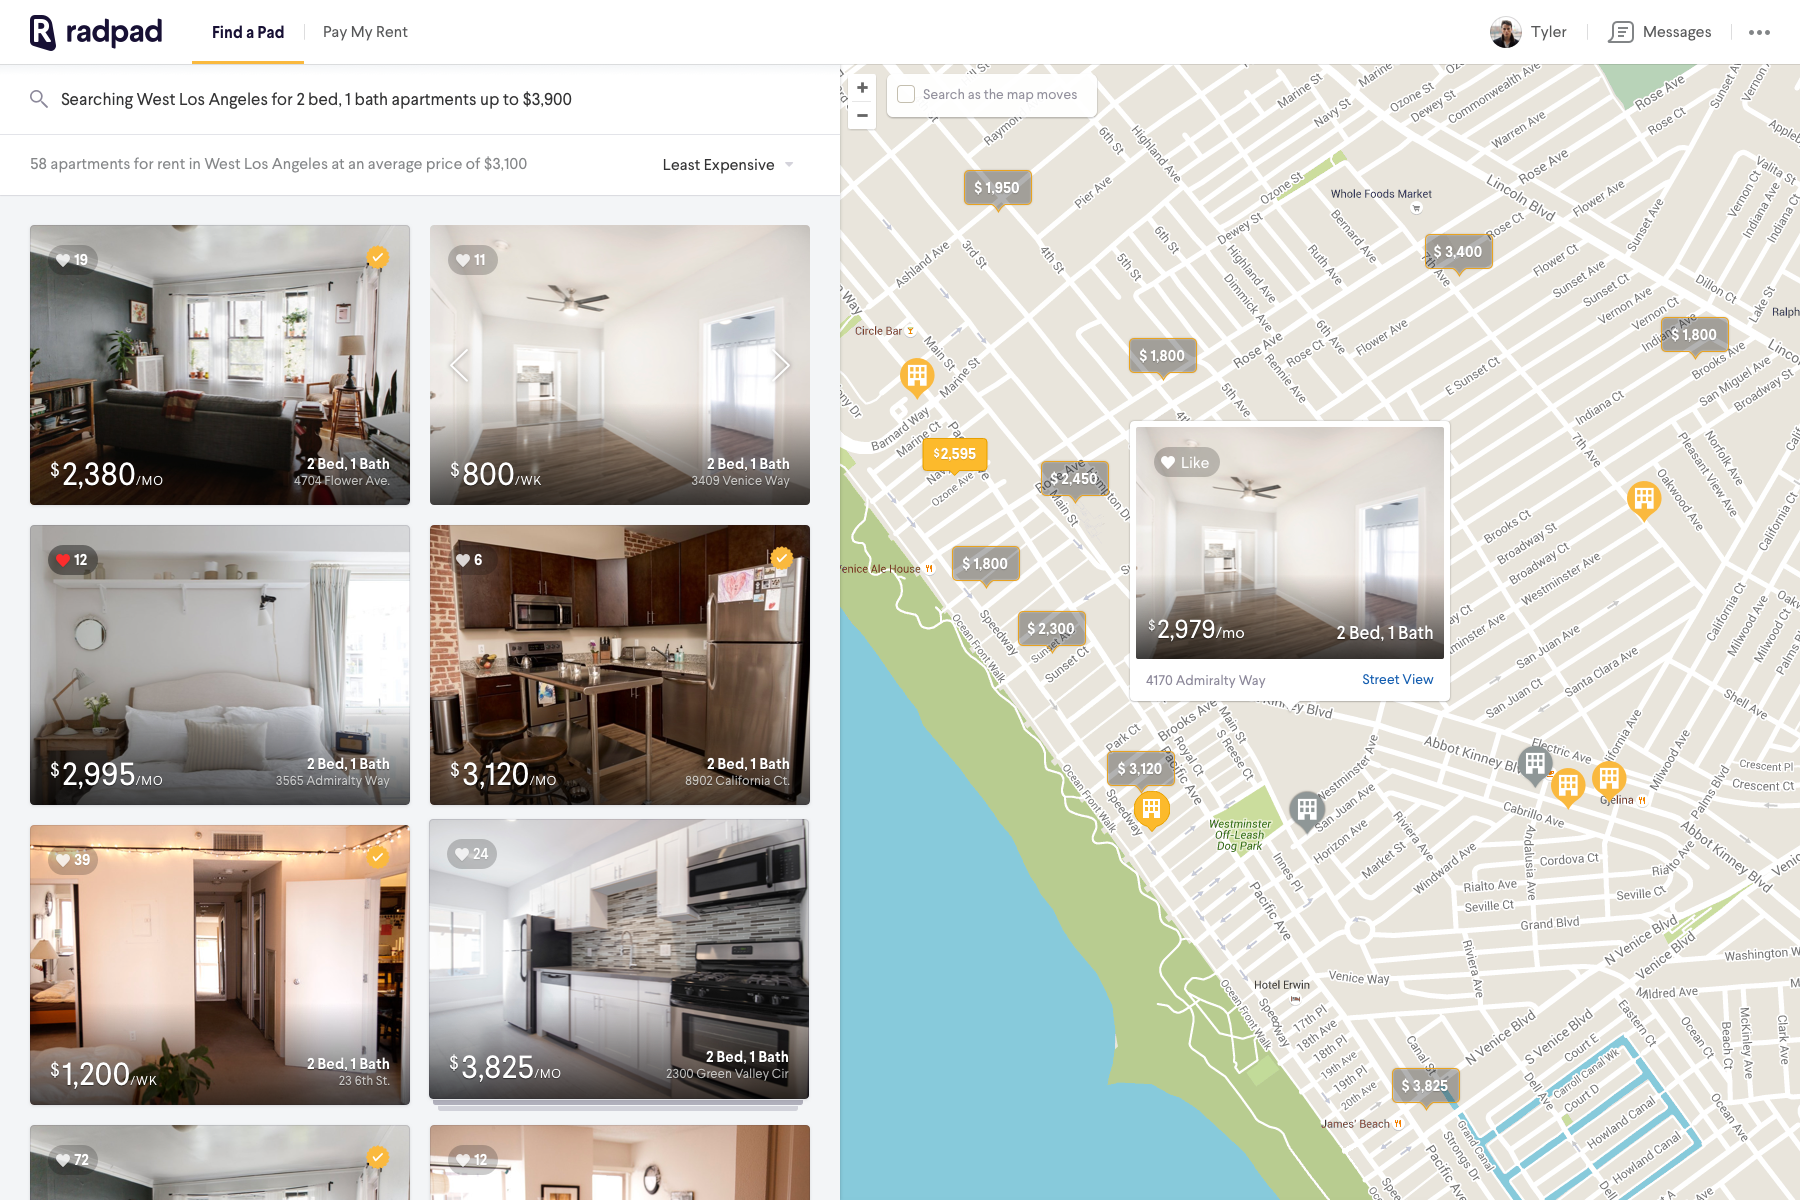 Find an Apartment on RadPad